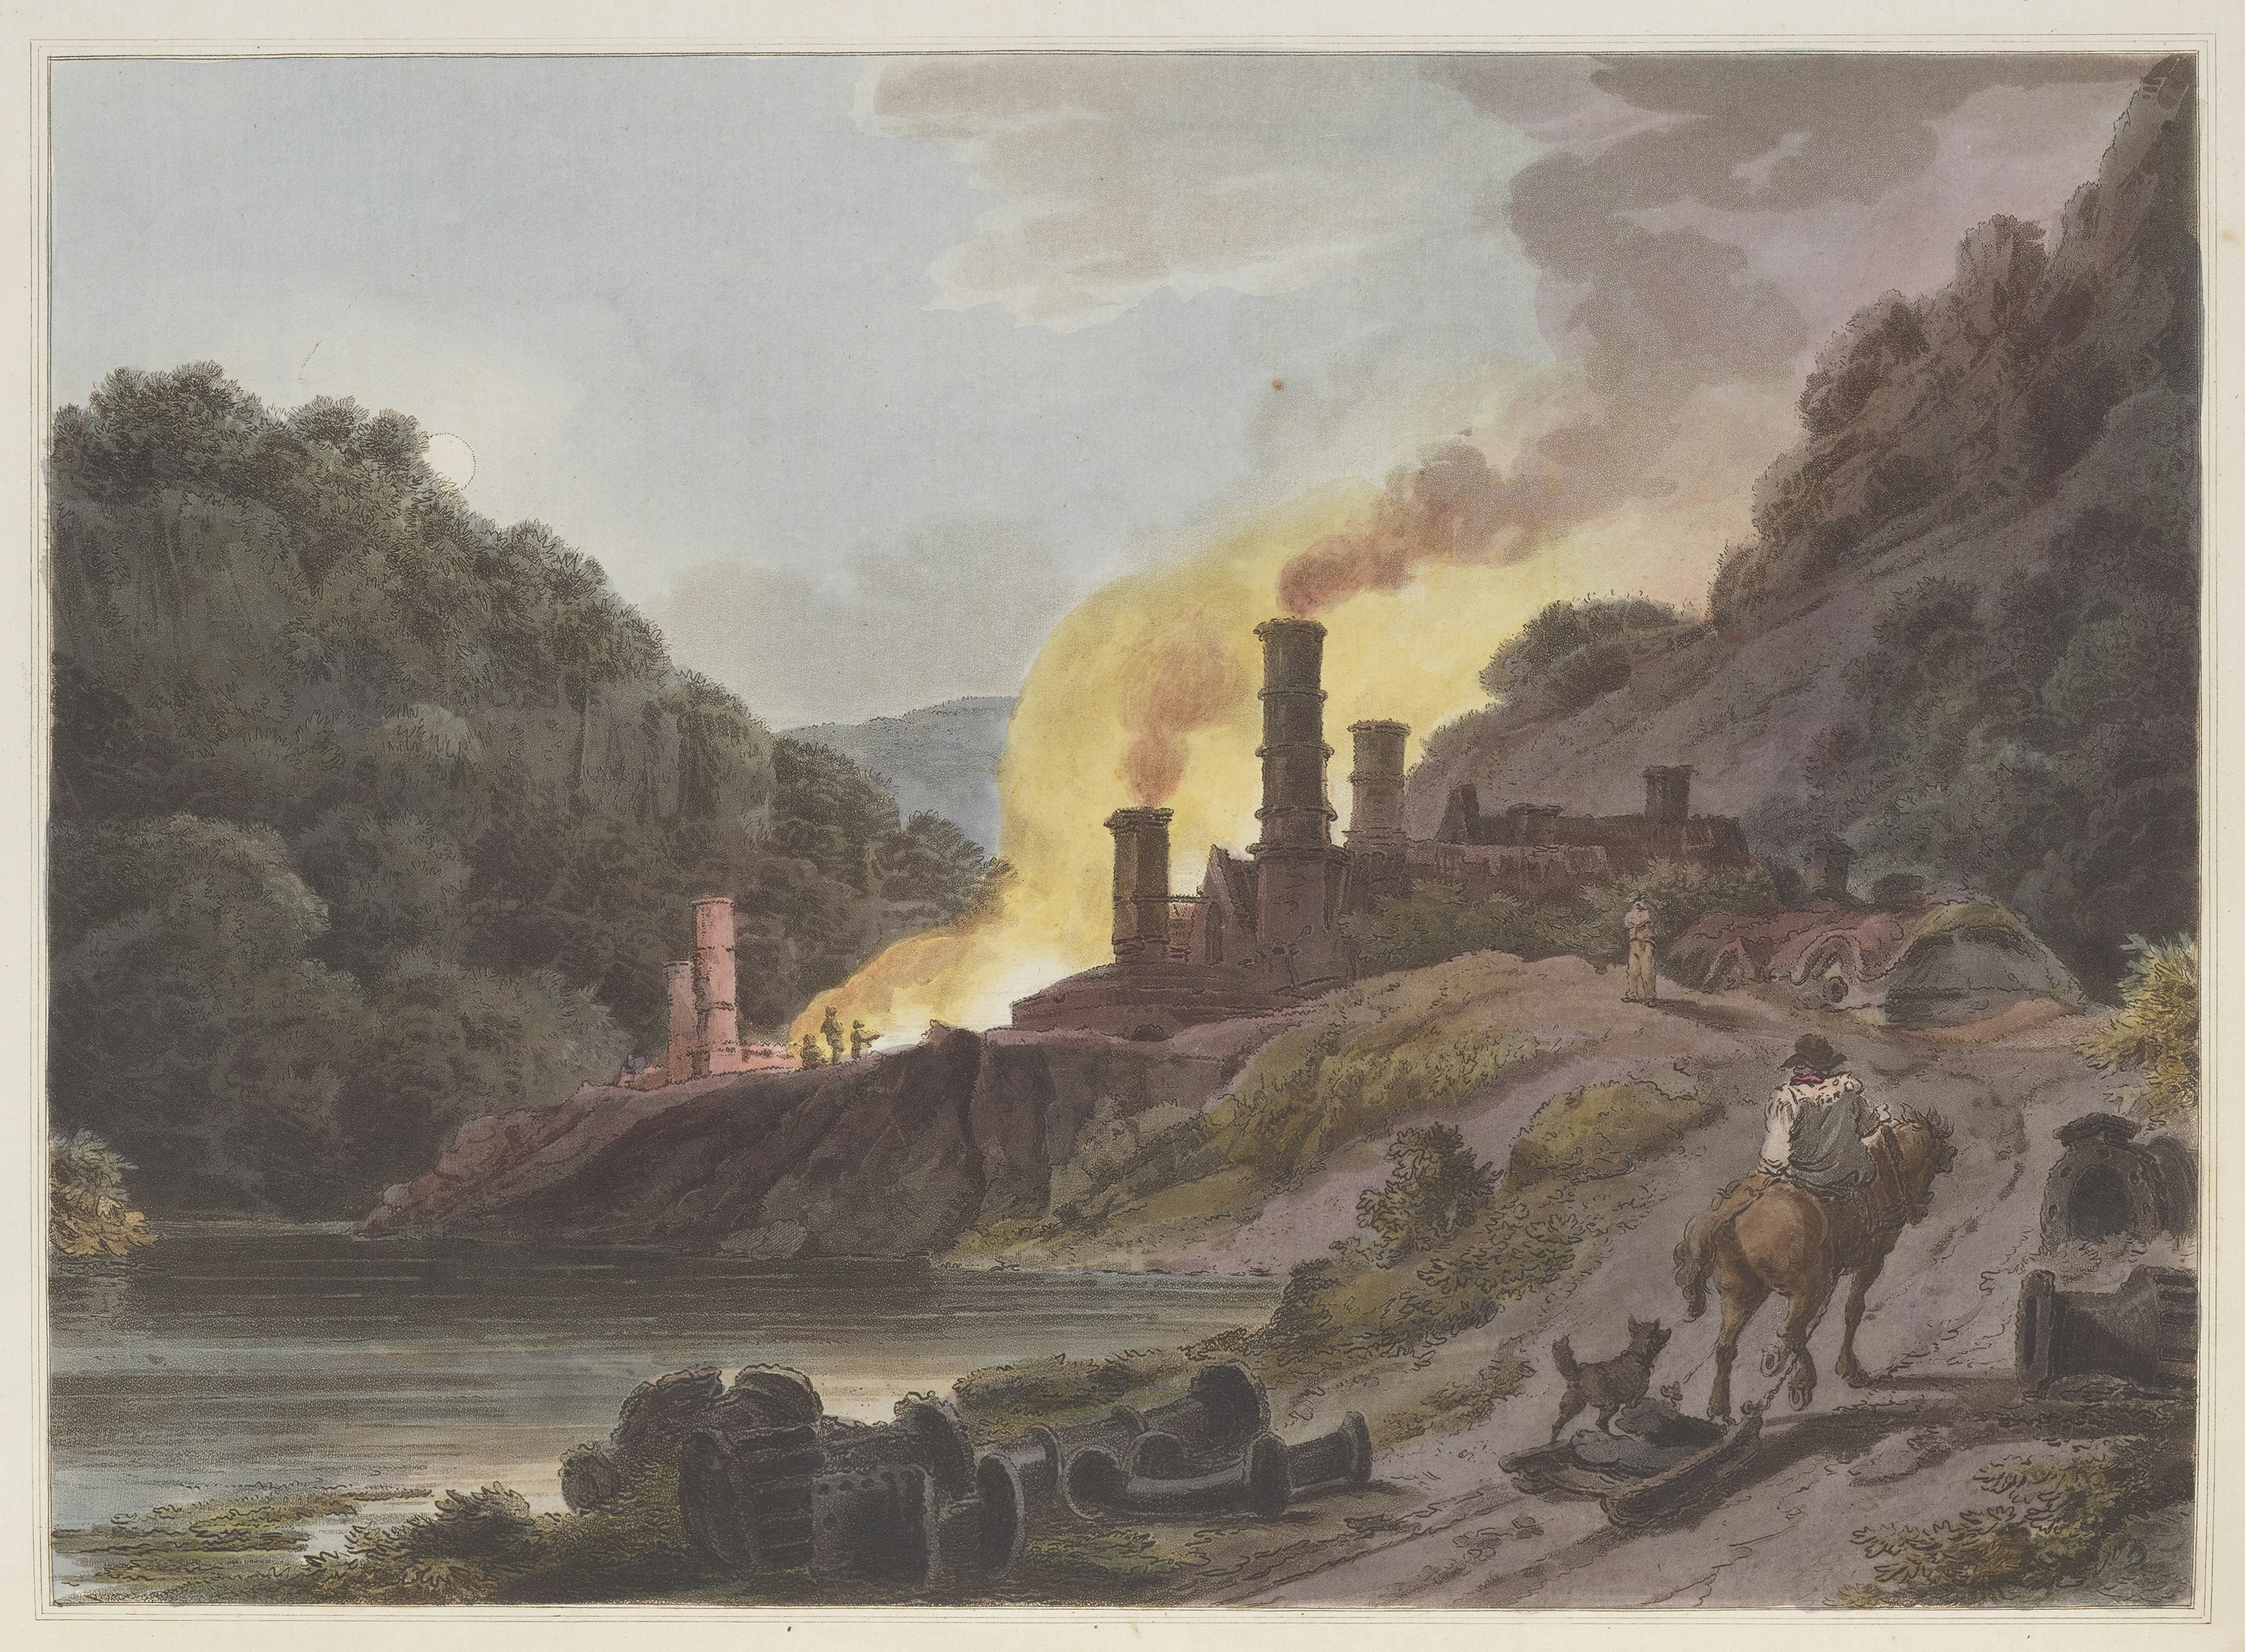 "The Romantic and Picturesque Scenery of England and Wales", 1805, Philippe-Jacques de Loutherbourg.  Aquatint from printed book. ©The Huntington Library, Art Museum, and Botanical Gardens.